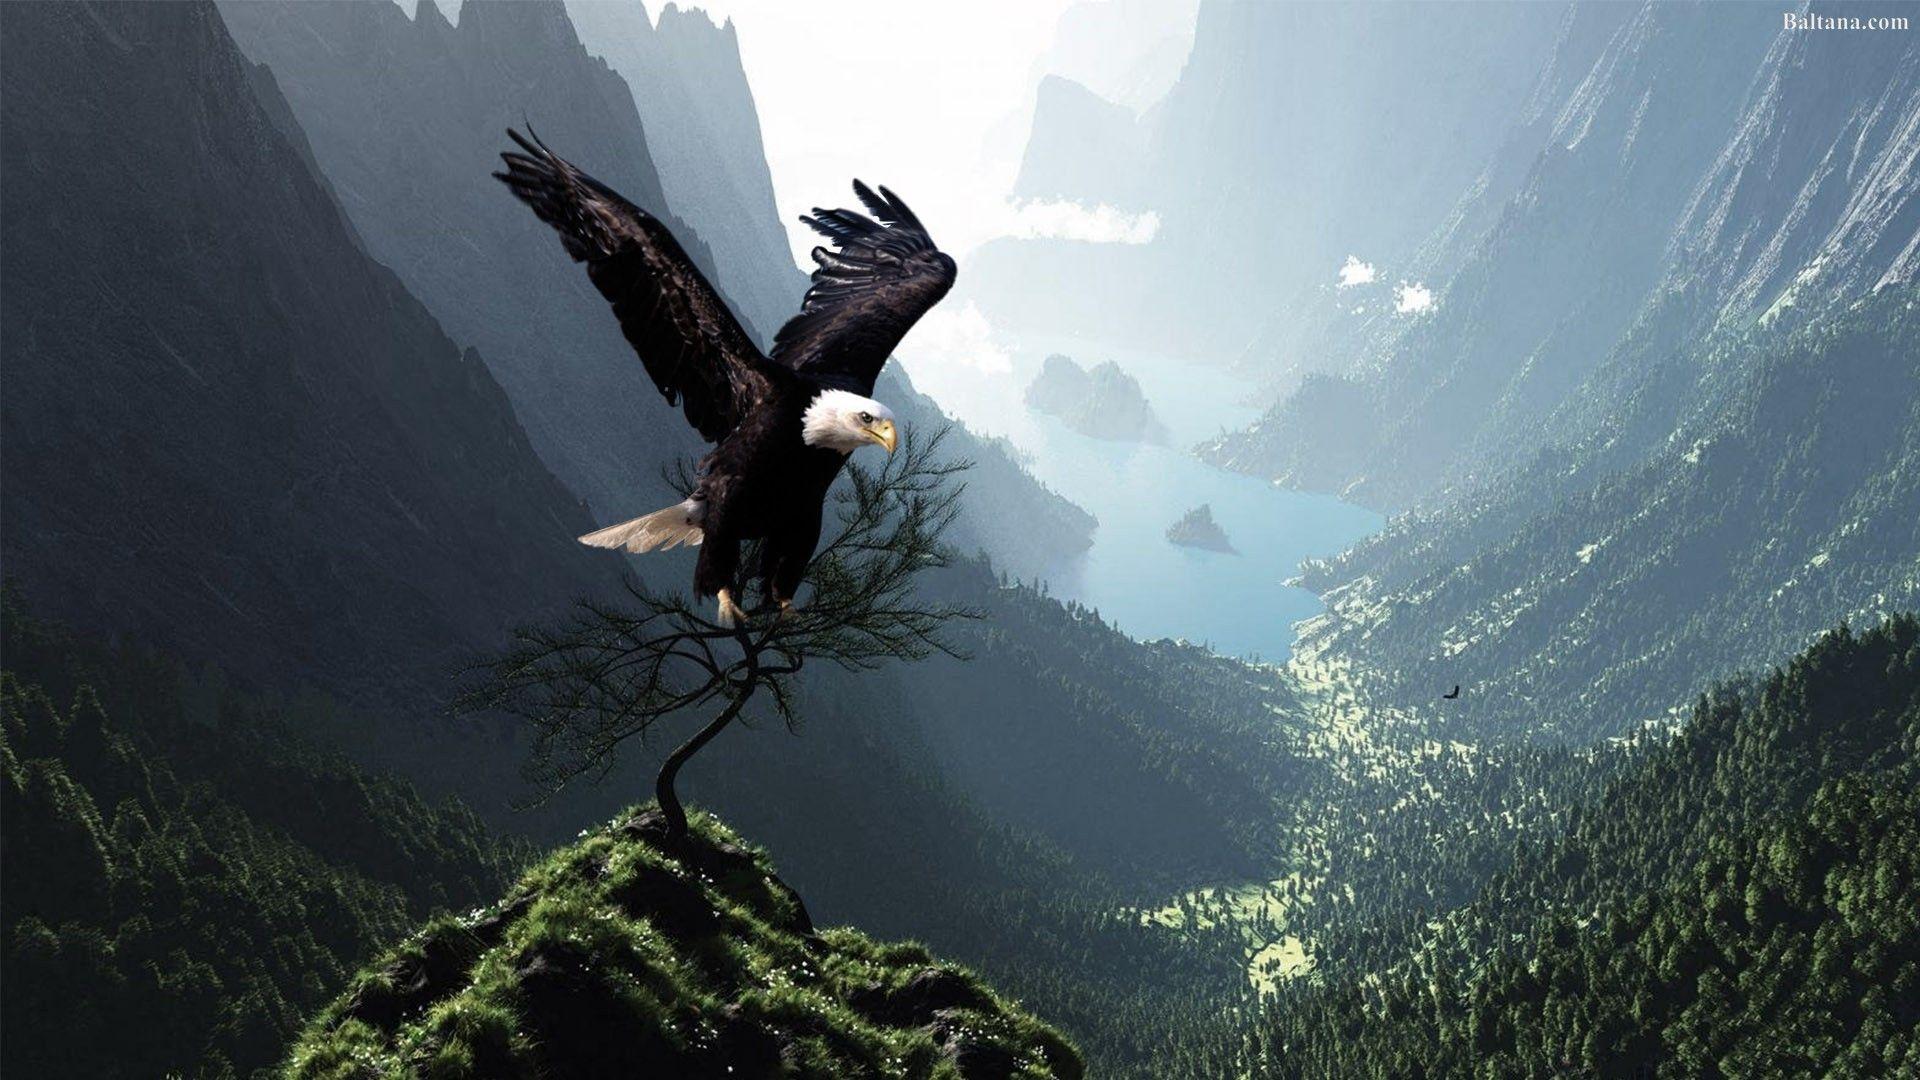 Large Vulture Flying Over The Mountains Background, Picture Of A Condor  Background Image And Wallpaper for Free Download